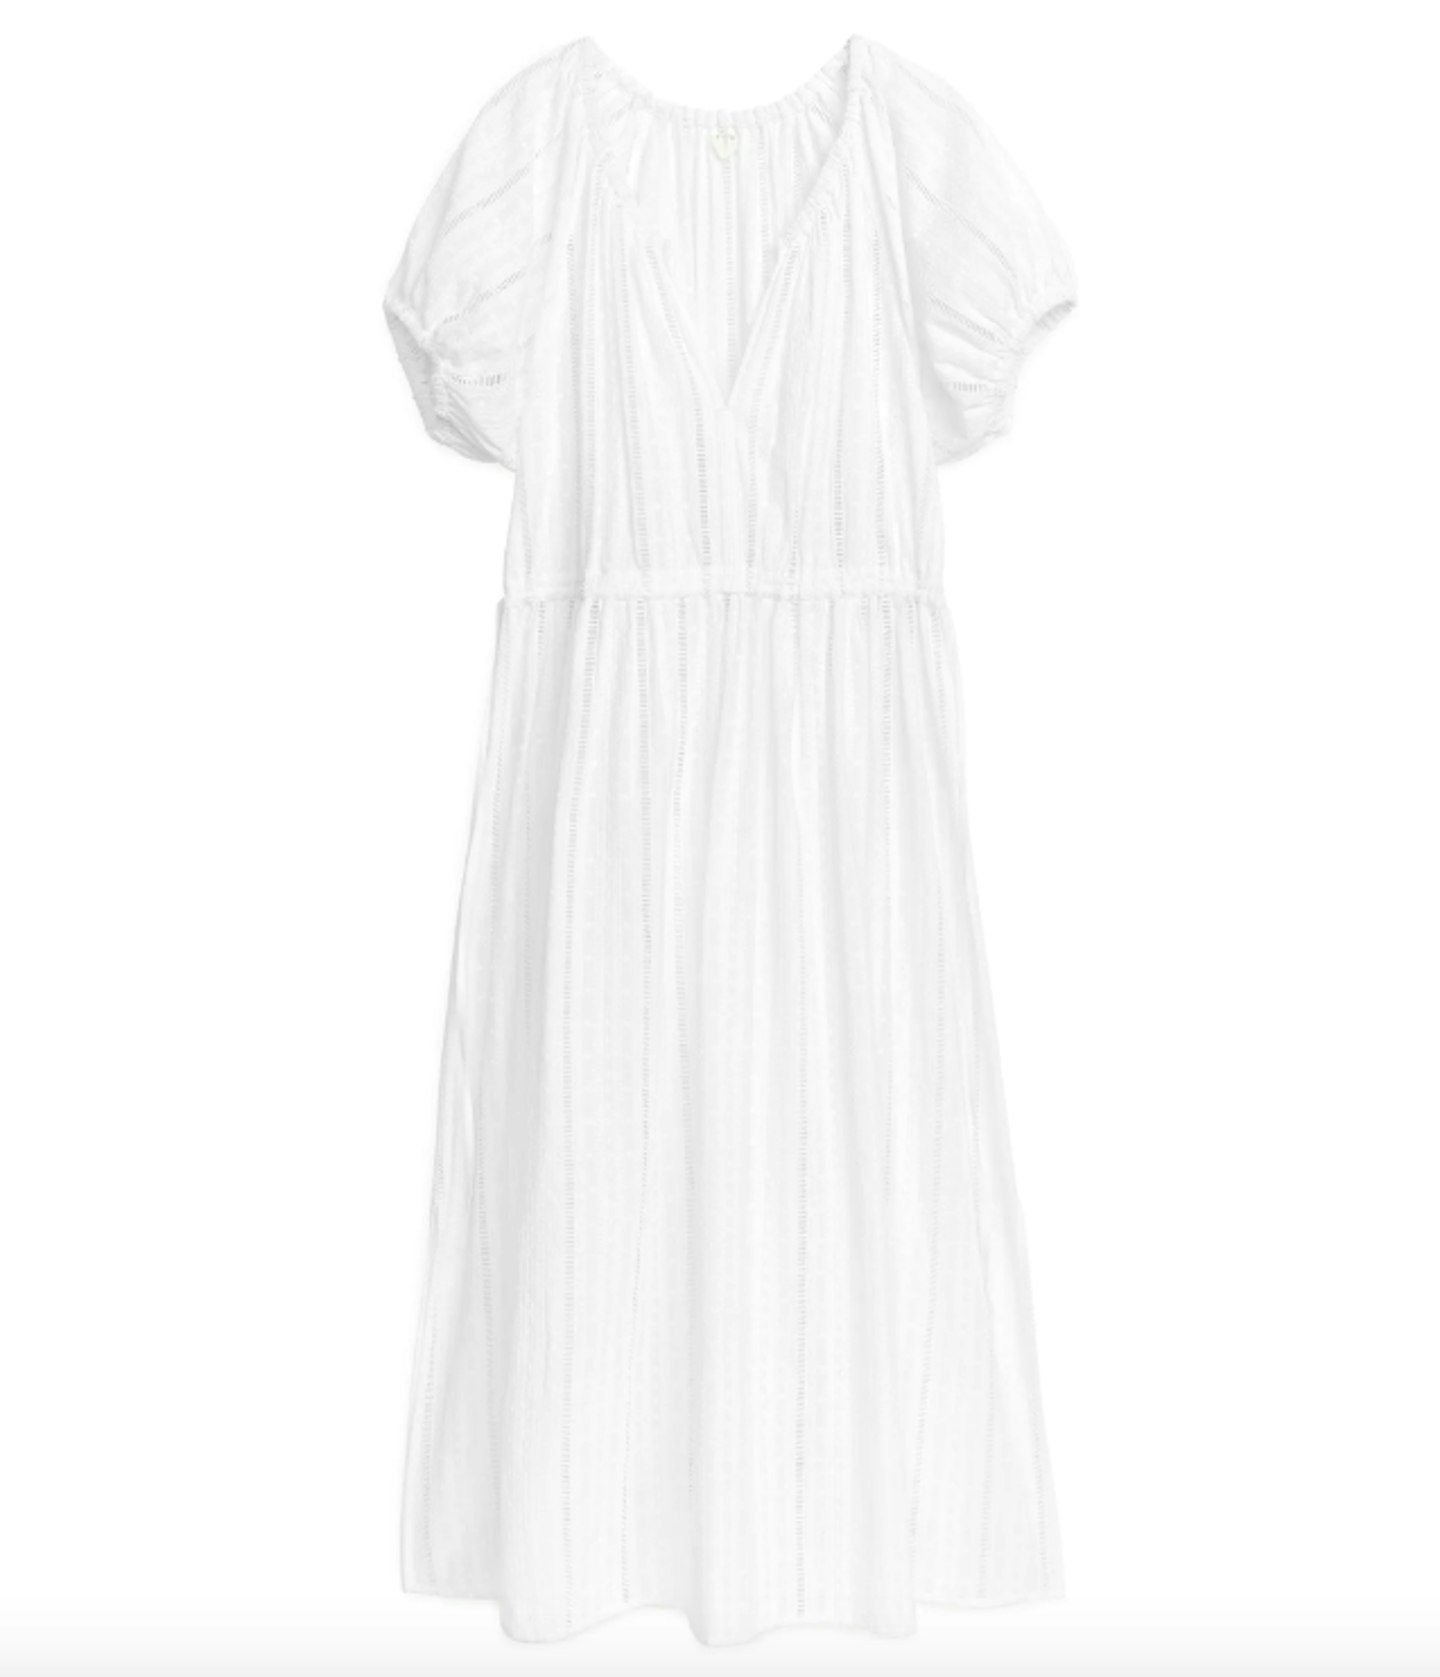 Arket, Broderie Anglaise Dress, £99